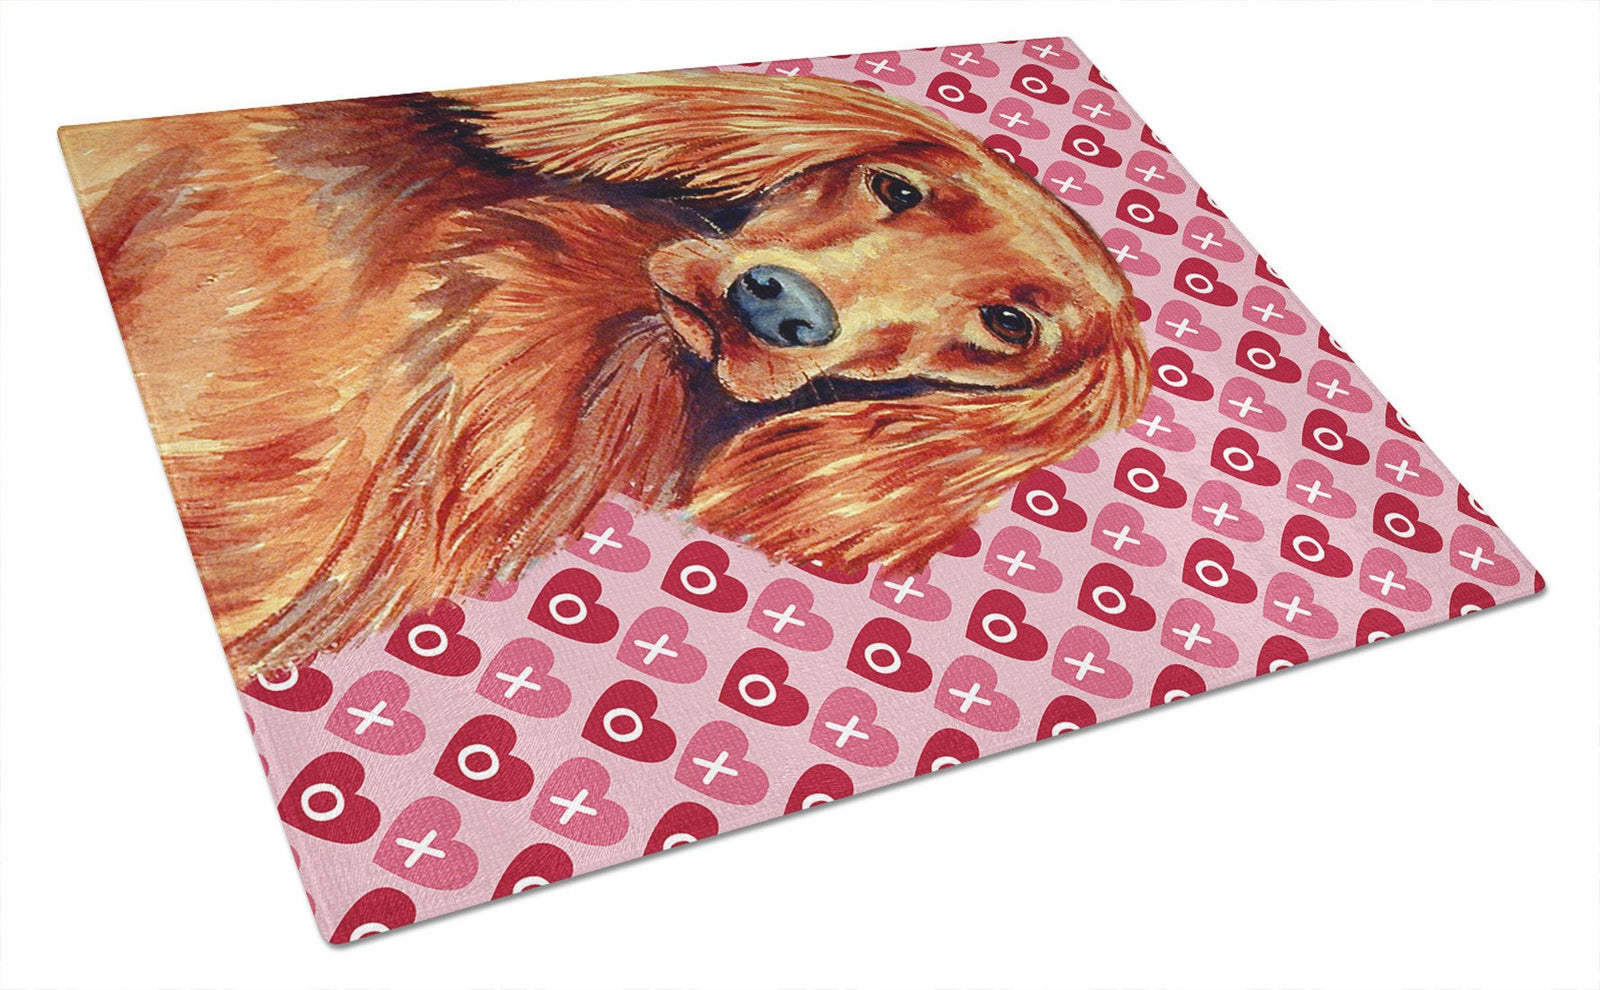 Irish Setter Hearts Love and Valentine's Day Portrait Glass Cutting Board Large by Caroline's Treasures